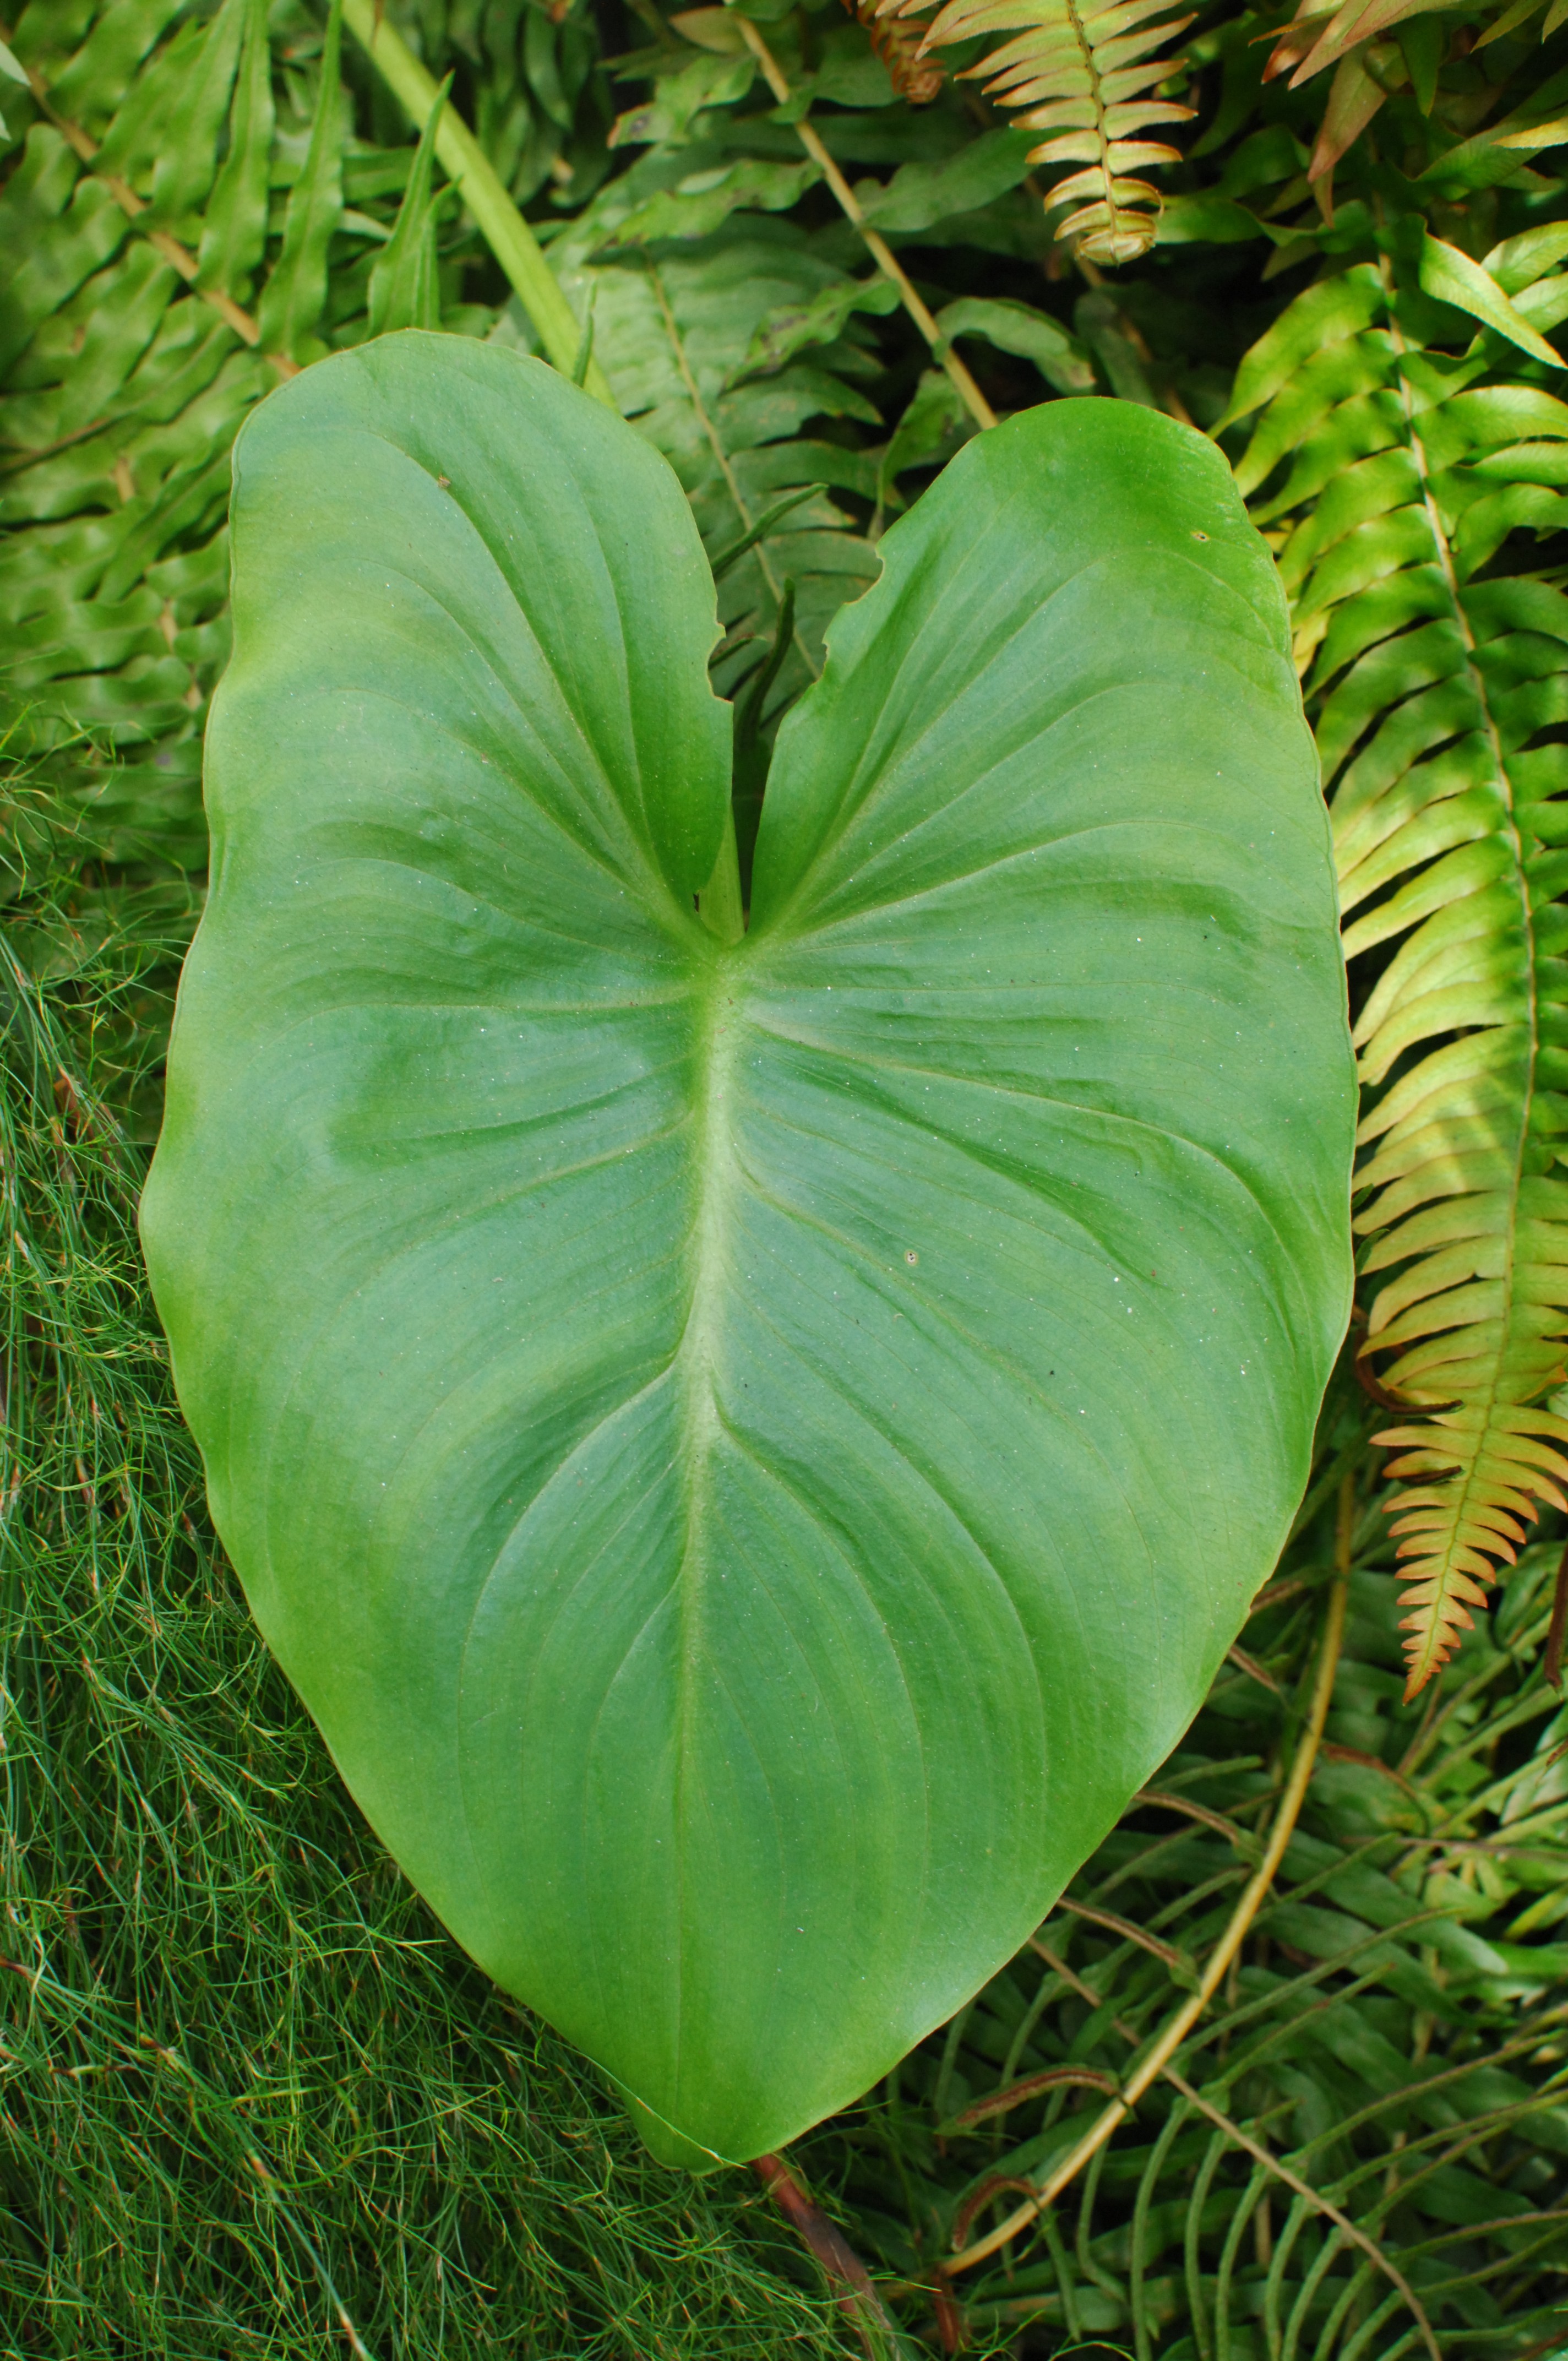 Mimi spotted a heart-shaped leaf at the Eden Project